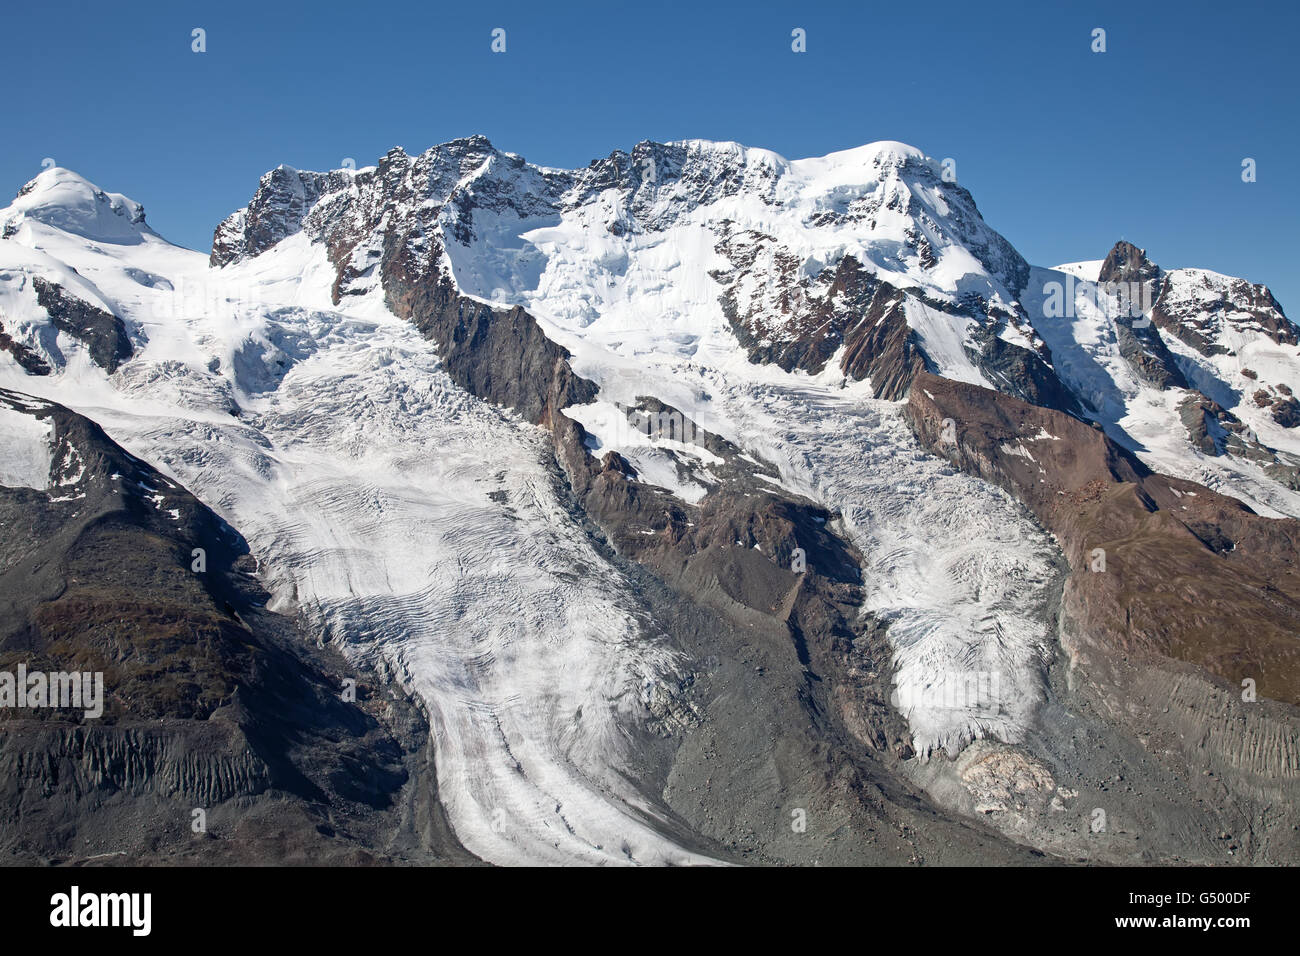 Melting glaciers in the swiss alps Stock Photo